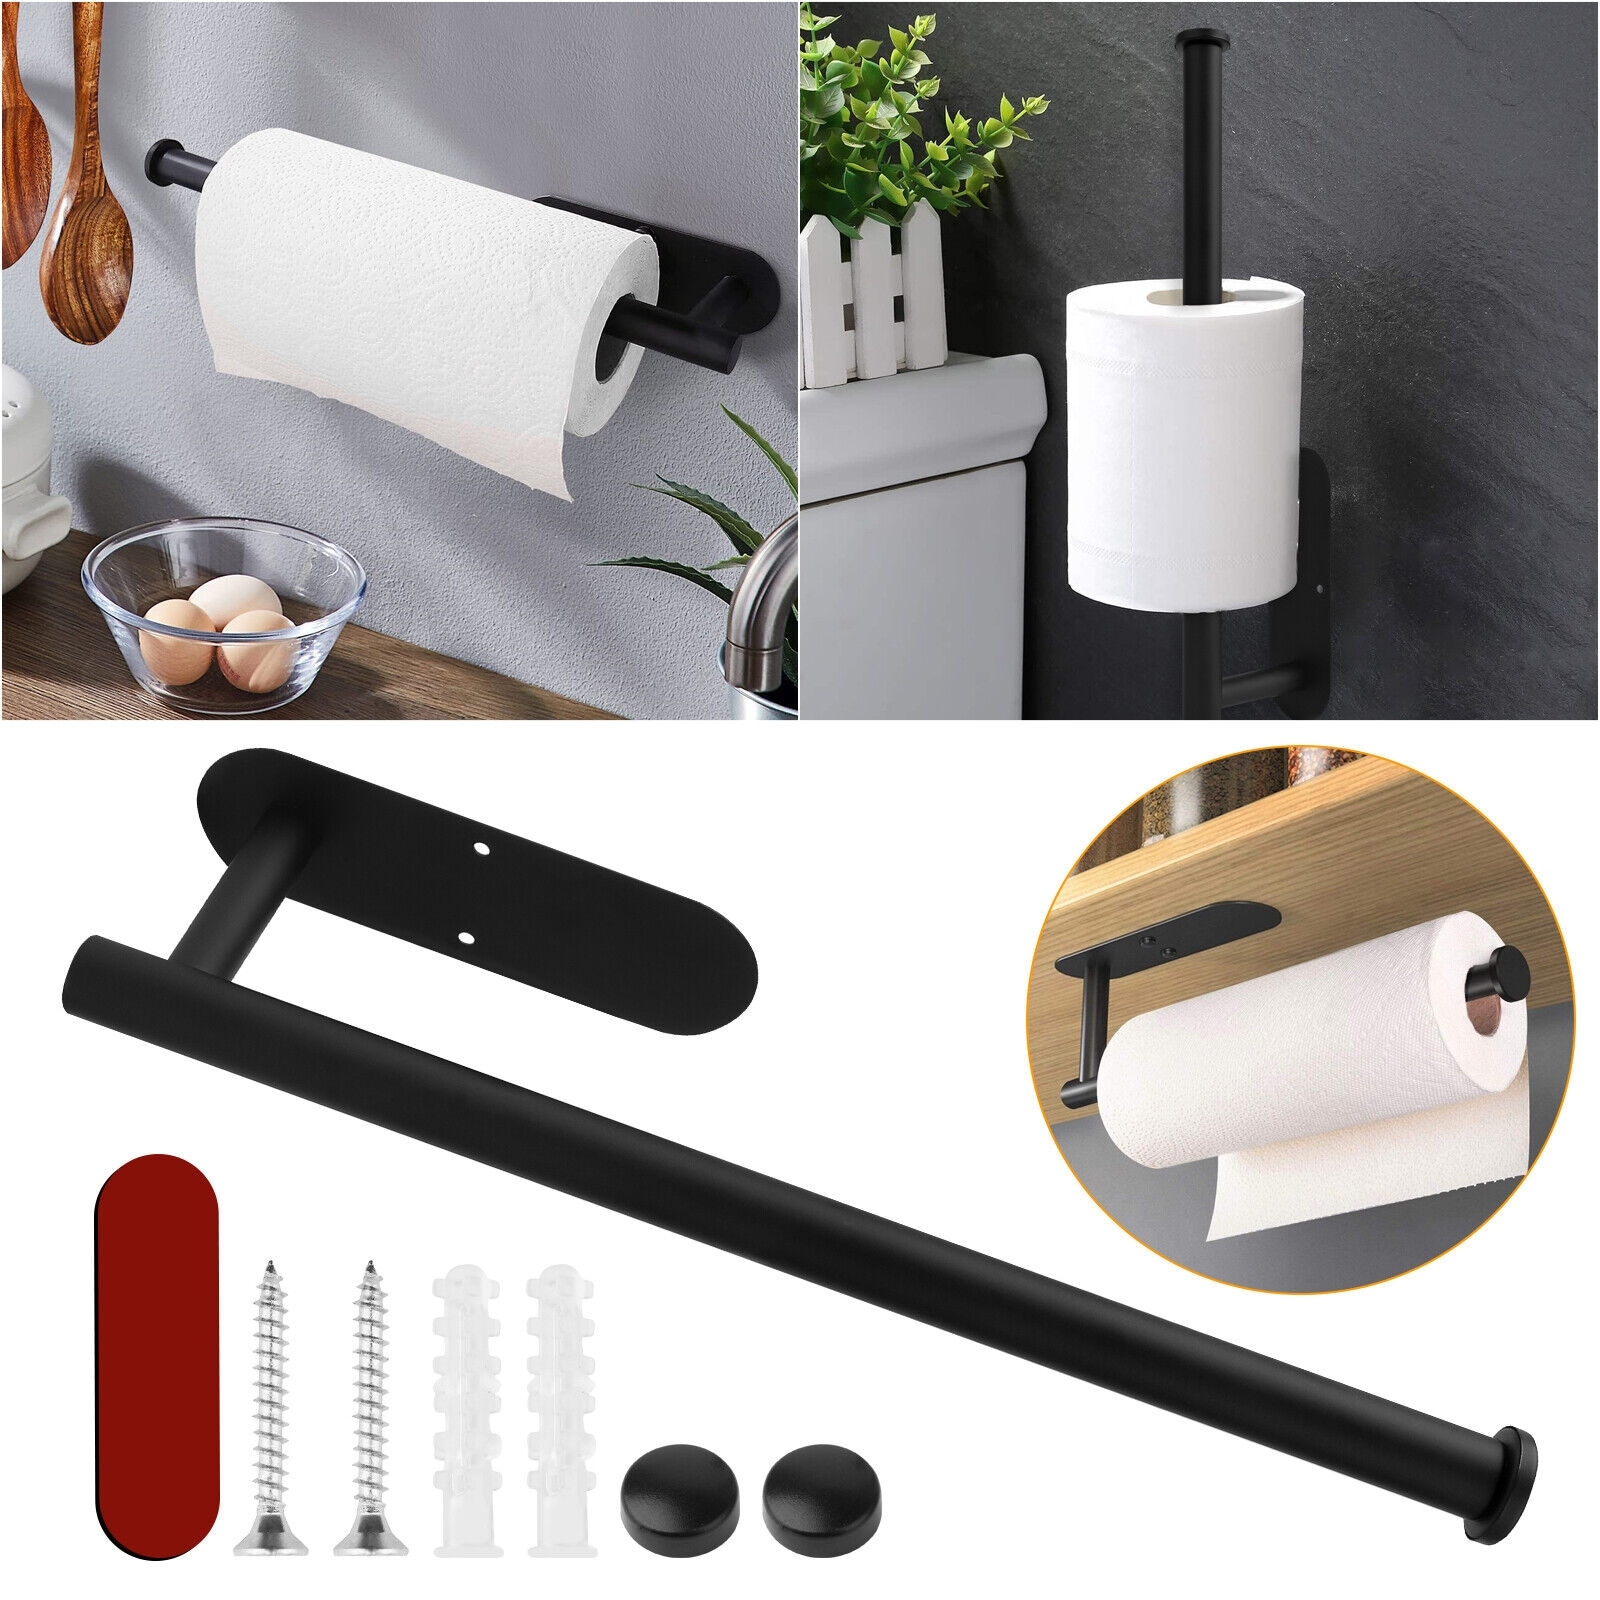 https://ak1.ostkcdn.com/images/products/is/images/direct/dd18f7516742b58e180236f50bd1675b4d25ac55/Self-adhesive-Paper-Towel-Holder.jpg